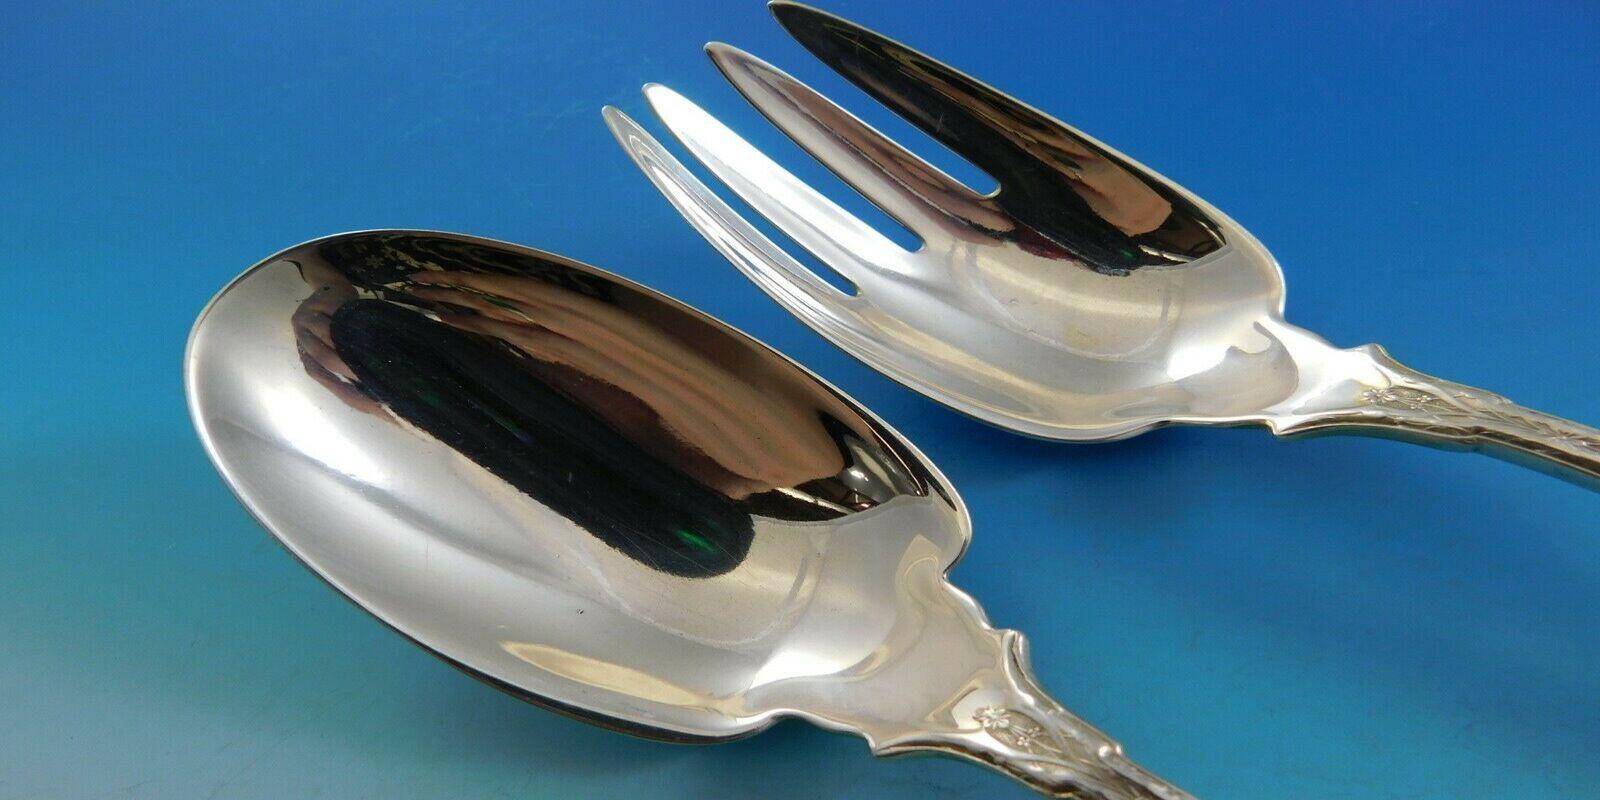 Persian originated in 1872 when exotic lands were in vogue (Japanese, Egyptian, Persian). It is absolutely striking with its intricate design. It is a beautiful example of the silver makers art.

Beautiful sterling silver salad serving set,